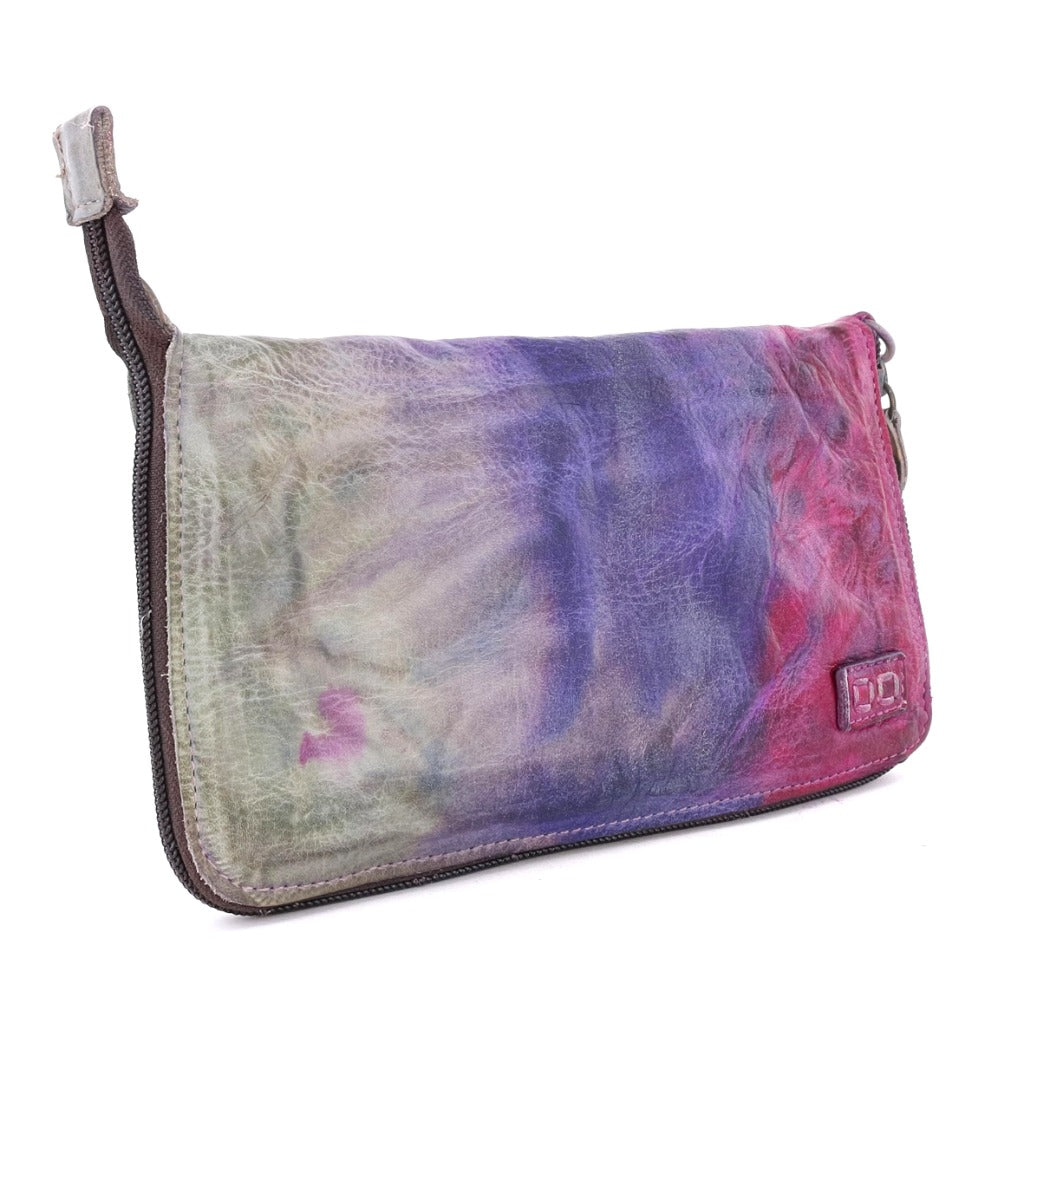 Bed Stu Templeton II pink and purple leather multi-functional leather clutch.